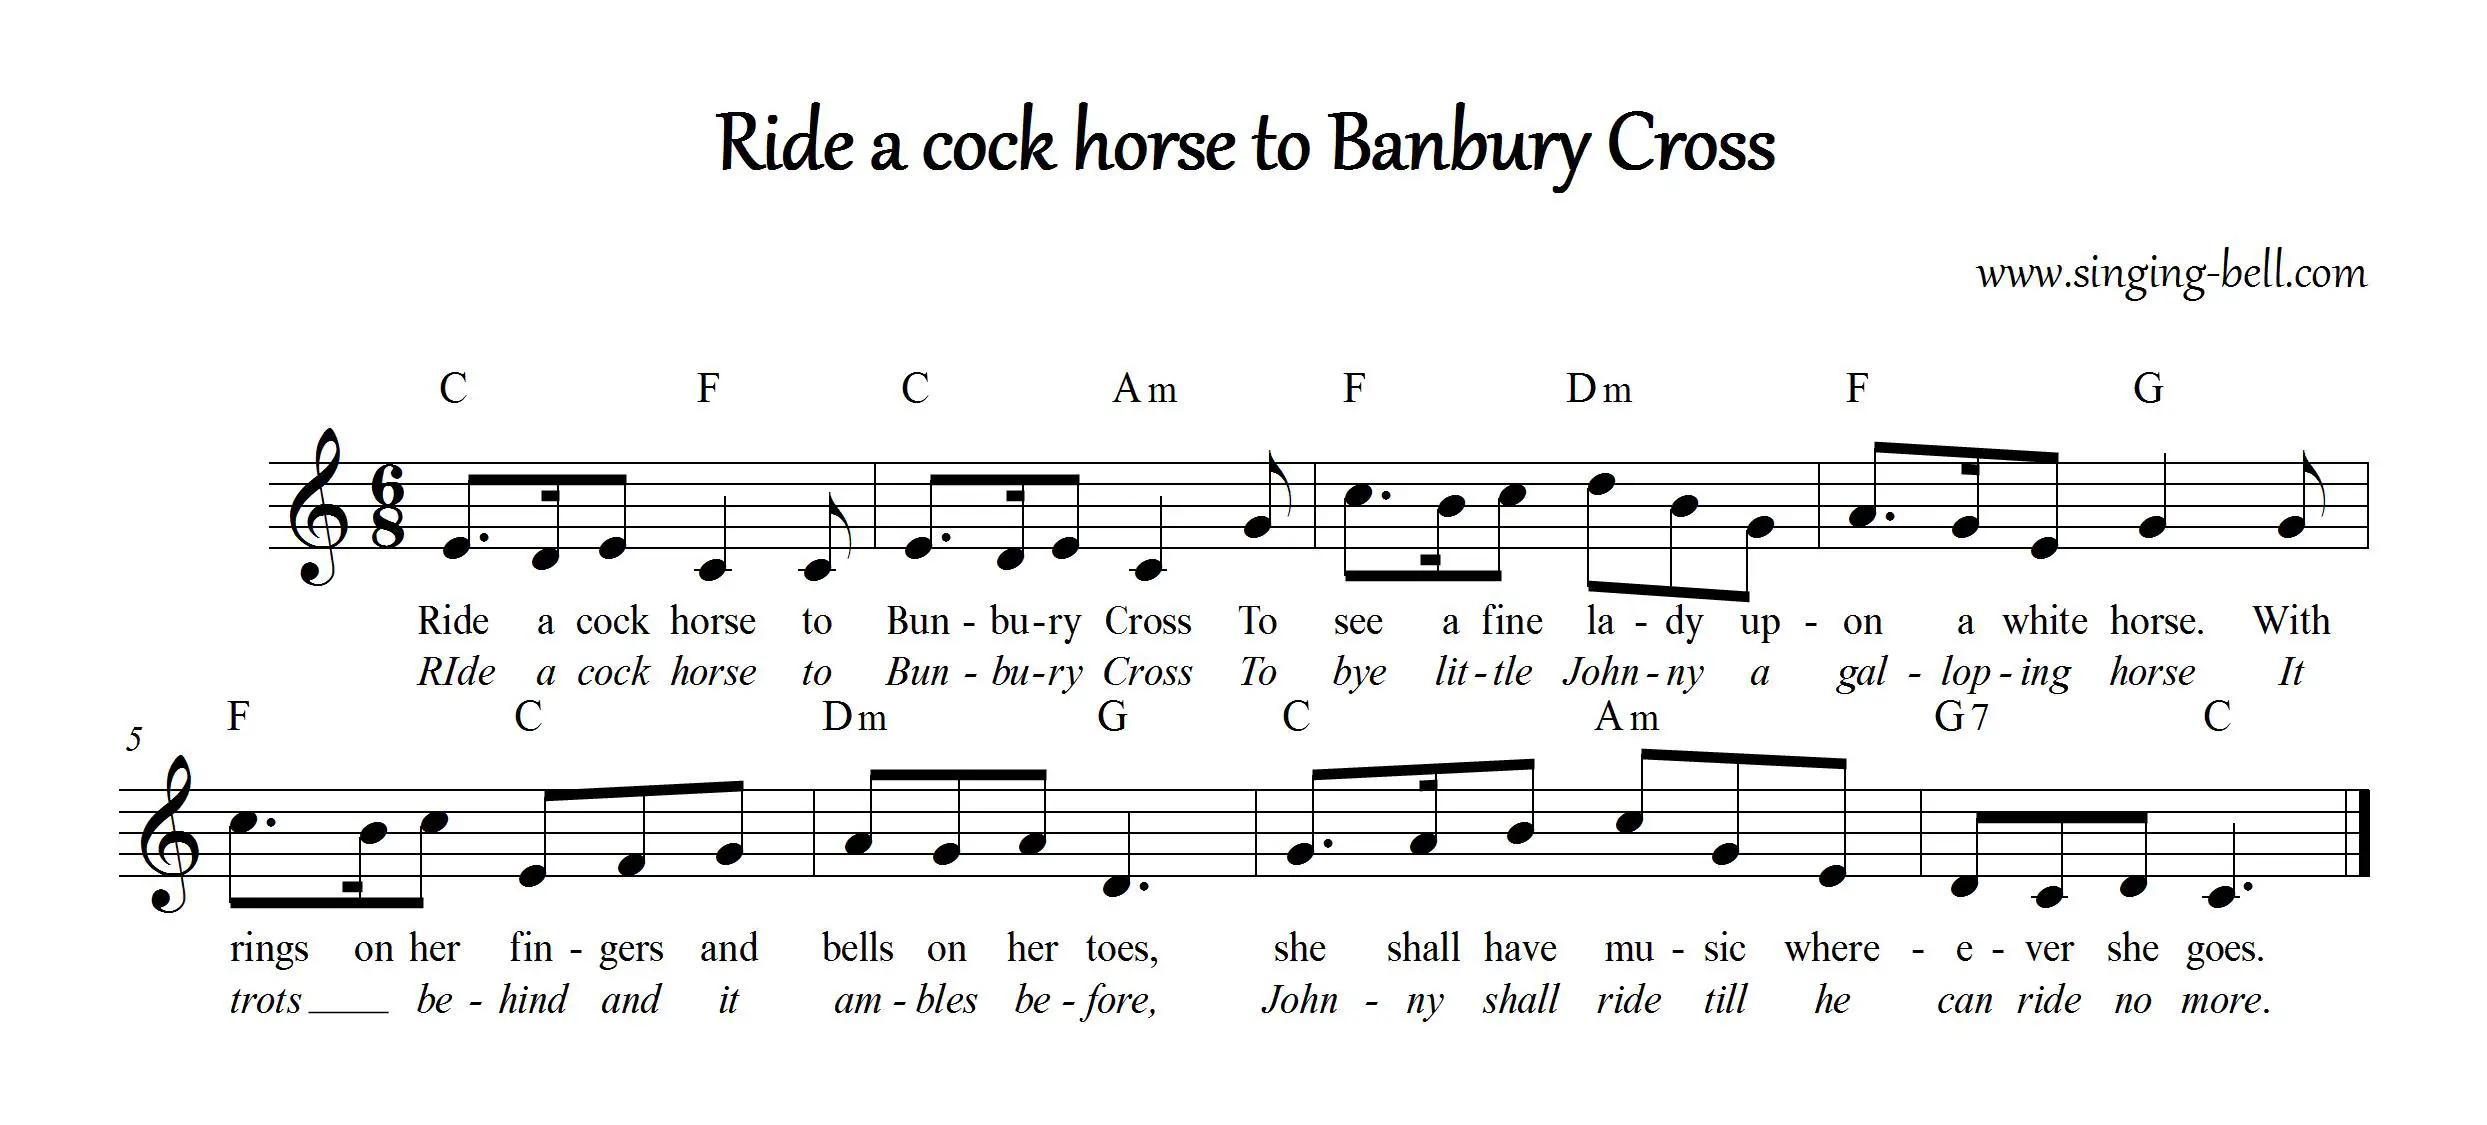 ride-a-cock-horse-to-banbury-cross_singing-bell